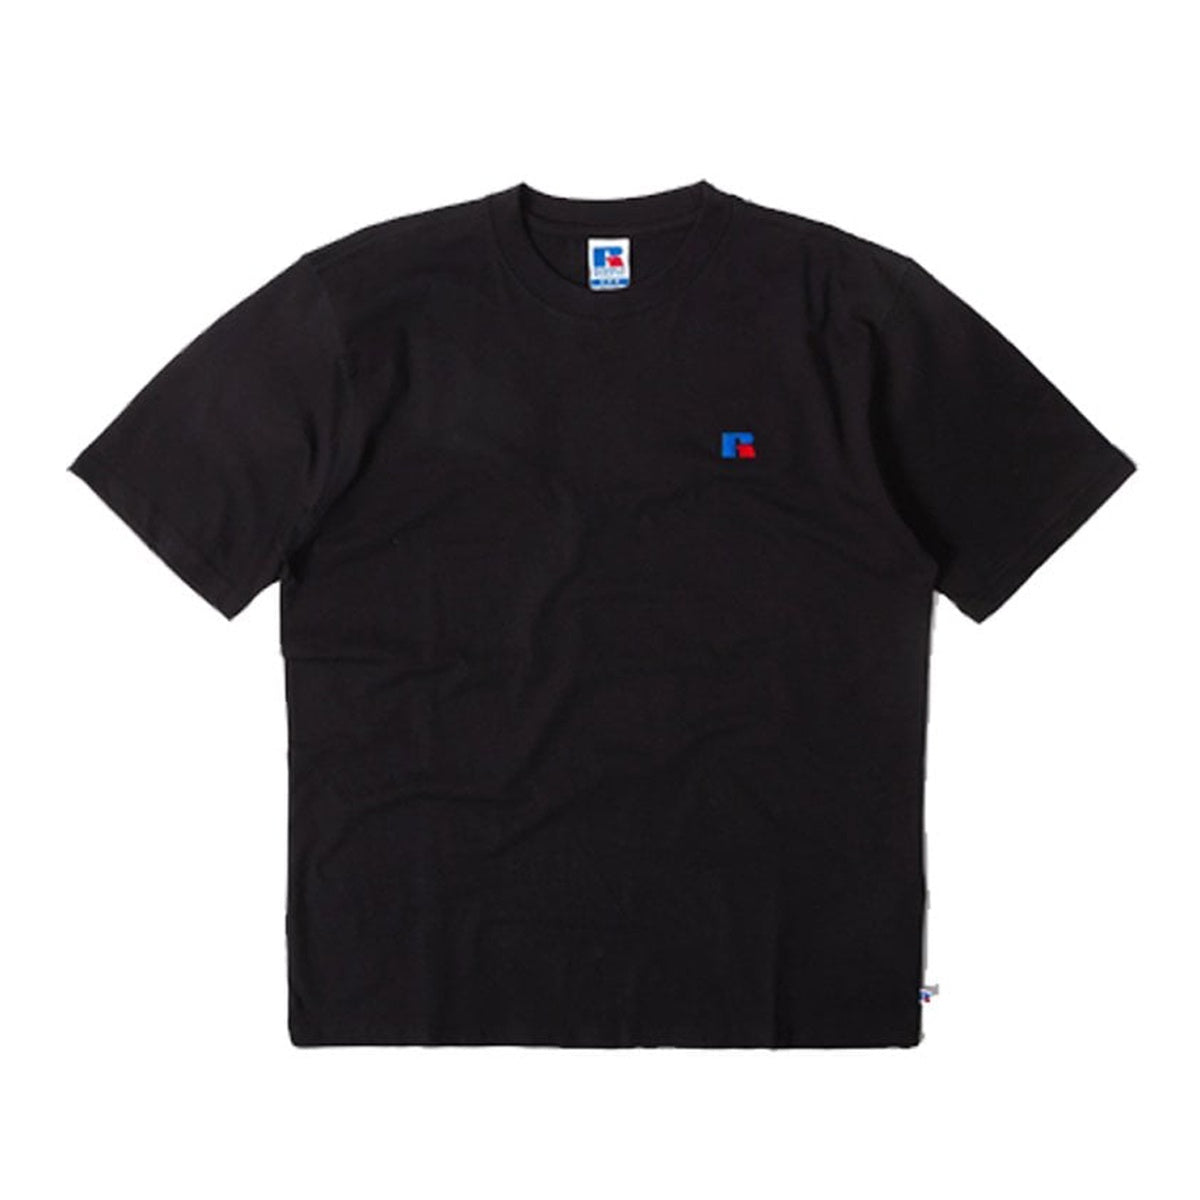 Russell Athletic Baseliners S/S Tee Shirt Black